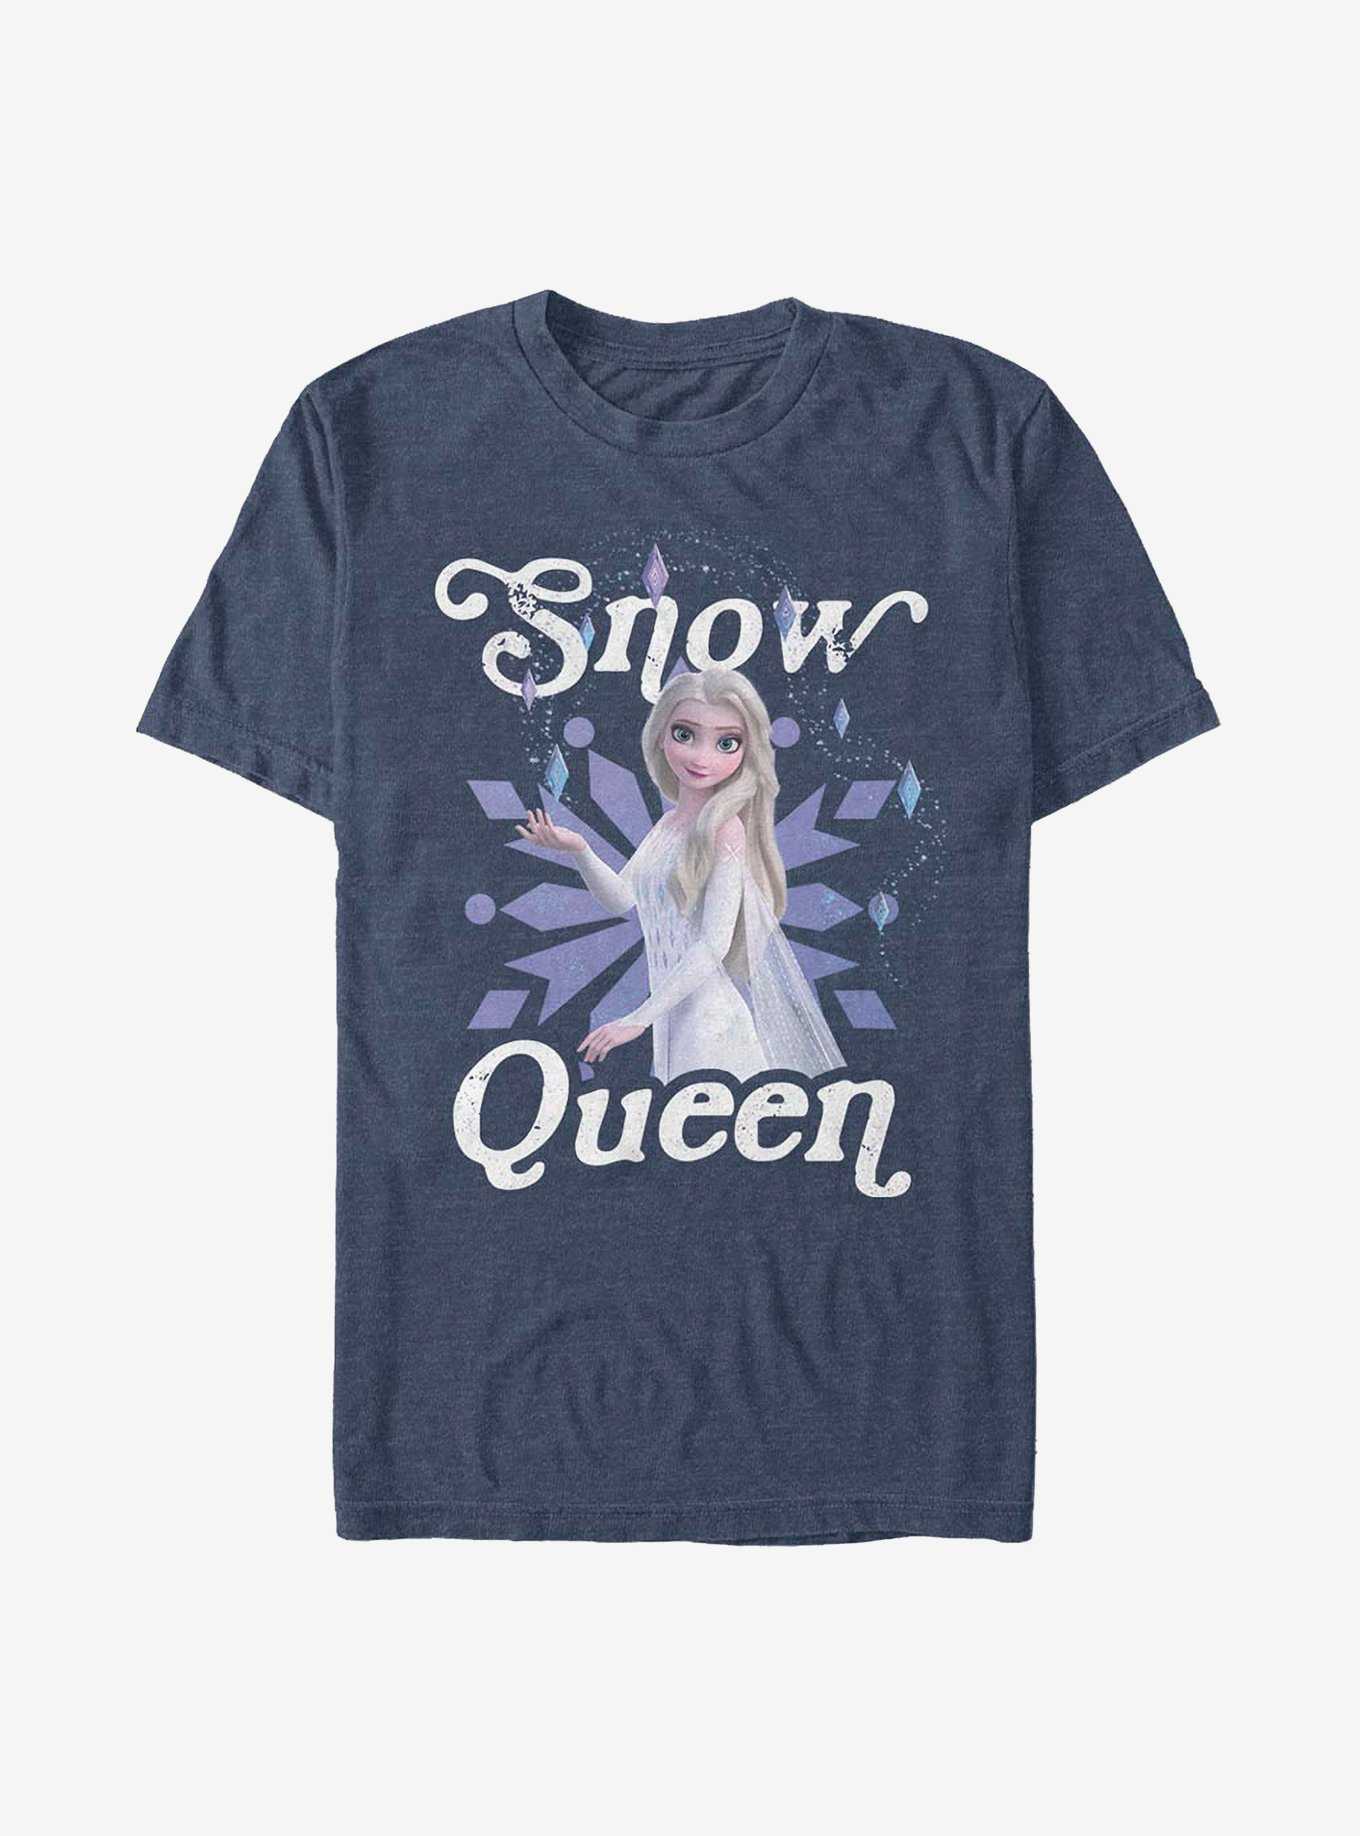 OFFICIAL Frozen Merchandise, | Shirts Topic & Clothing Hot